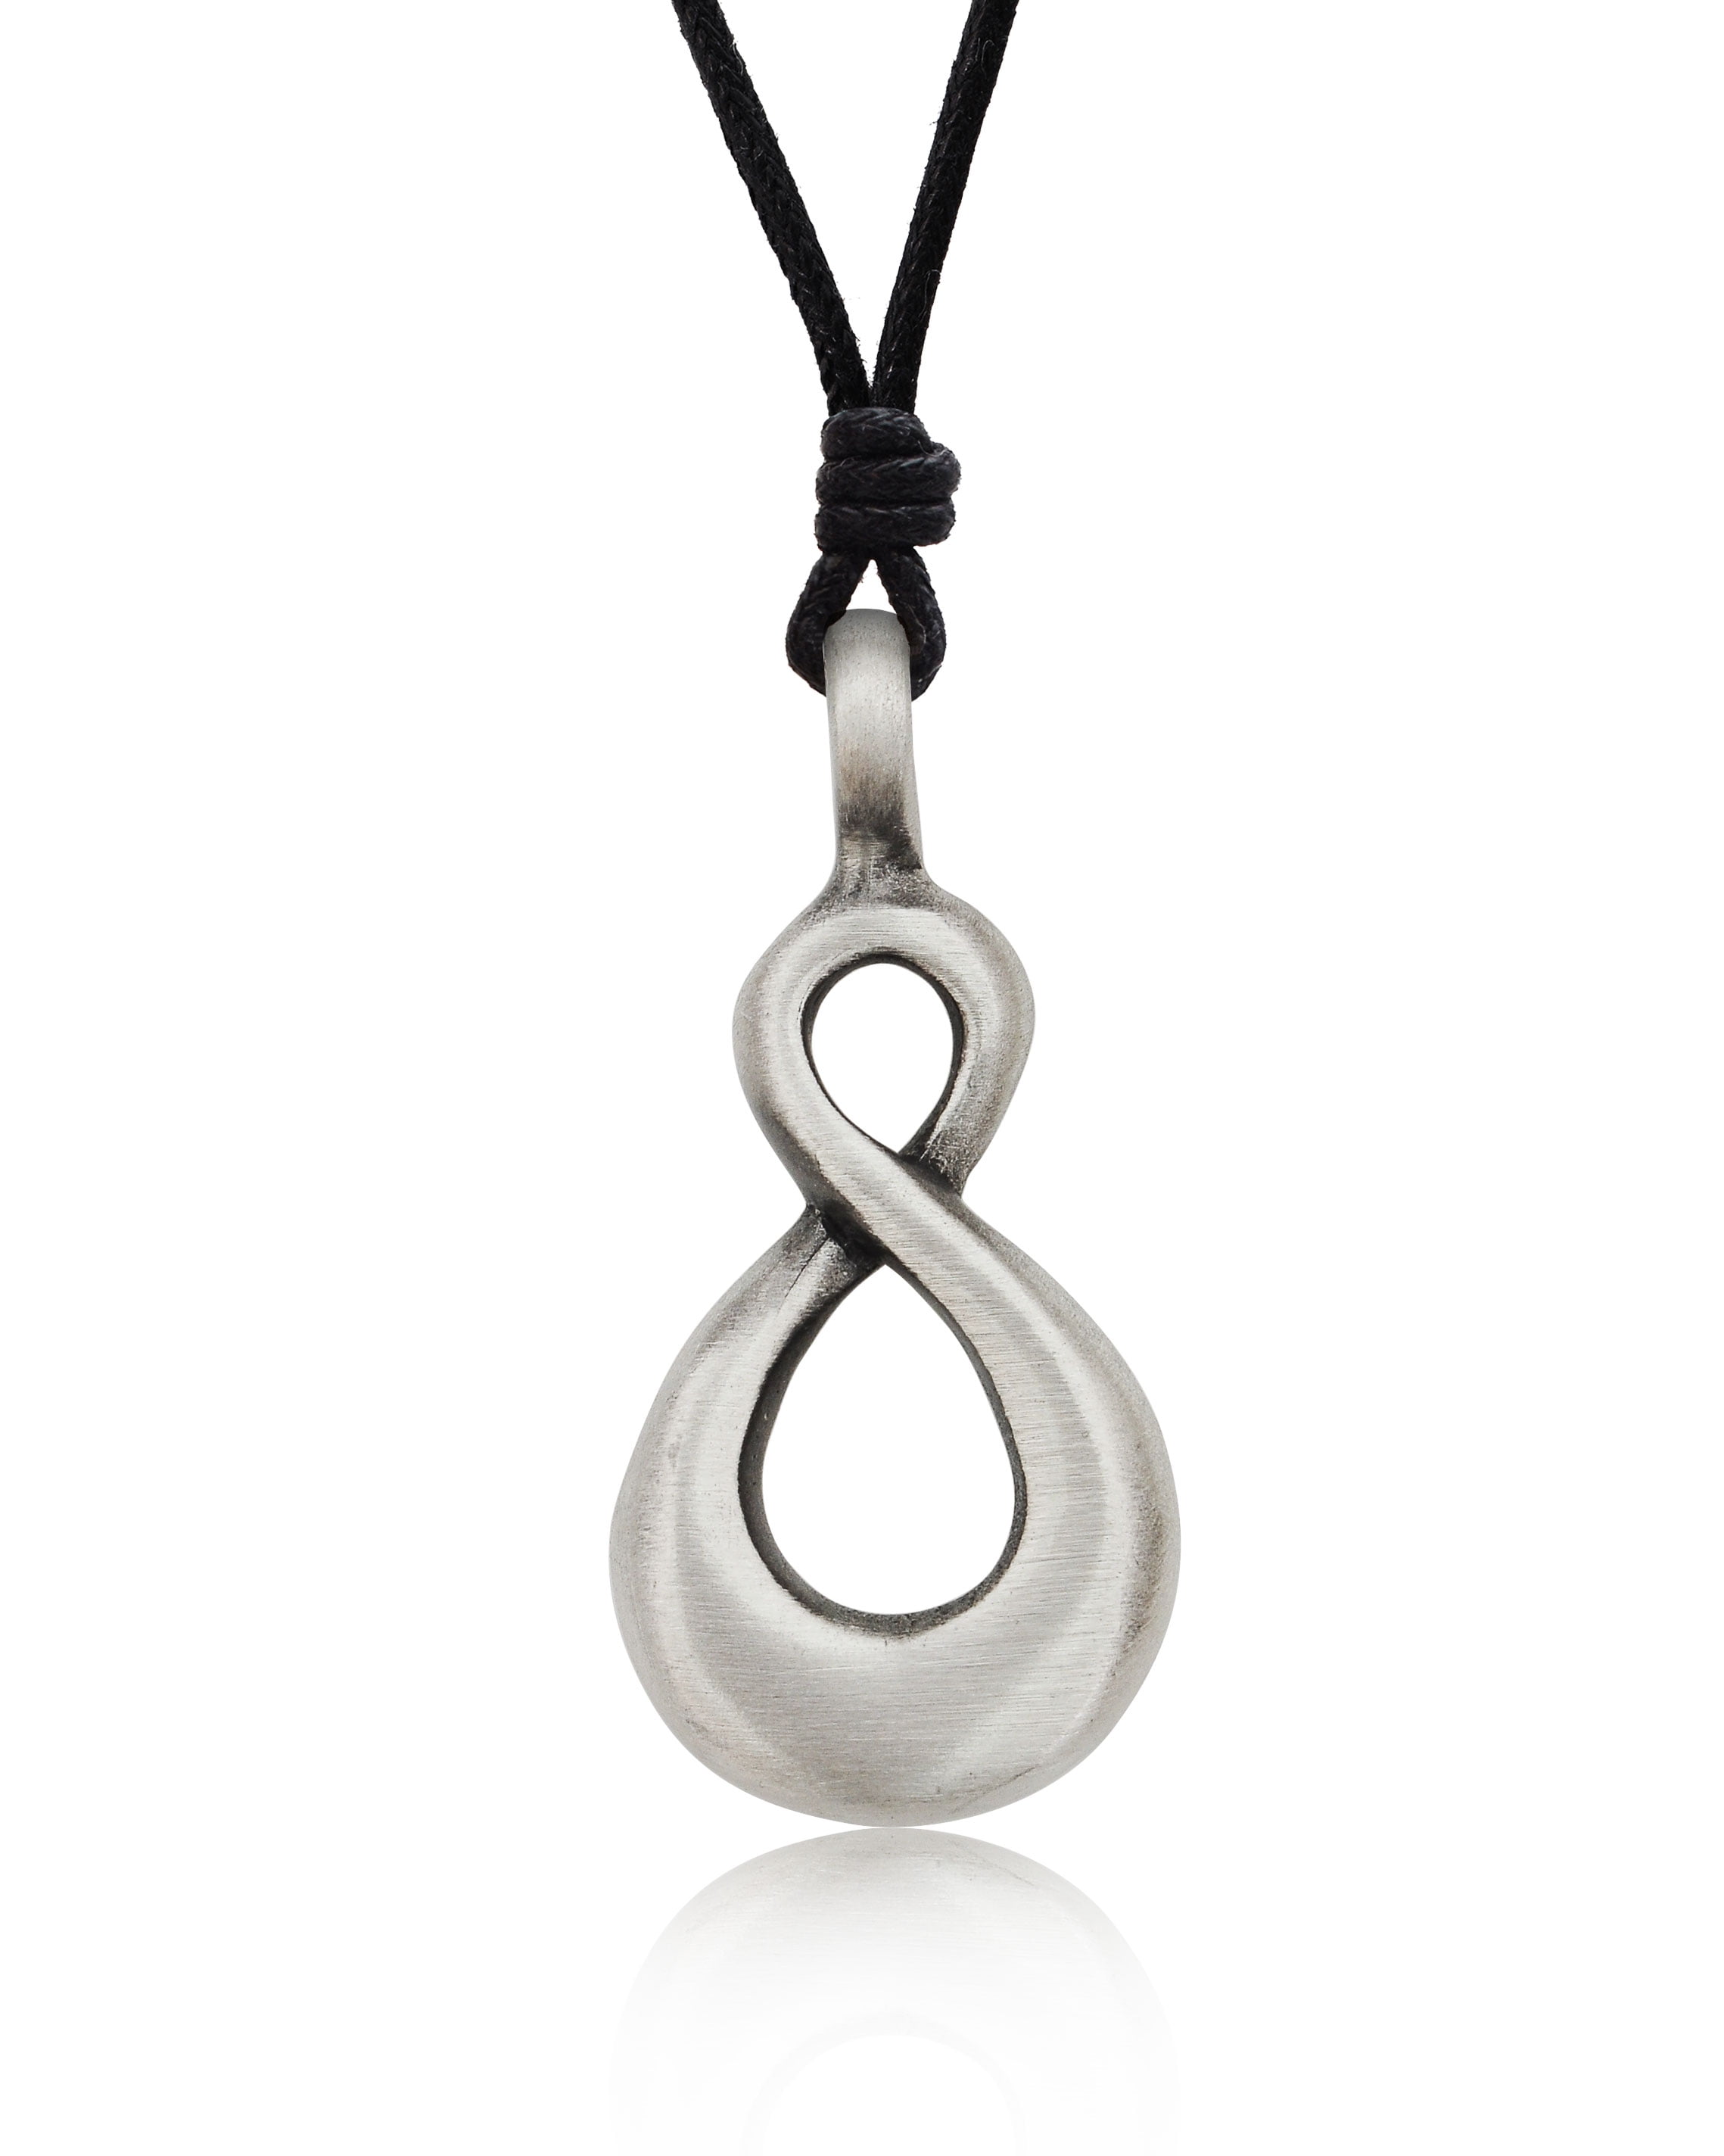 men's silver pendant American crafted pendant necklace, Details about   Tribal pendant 